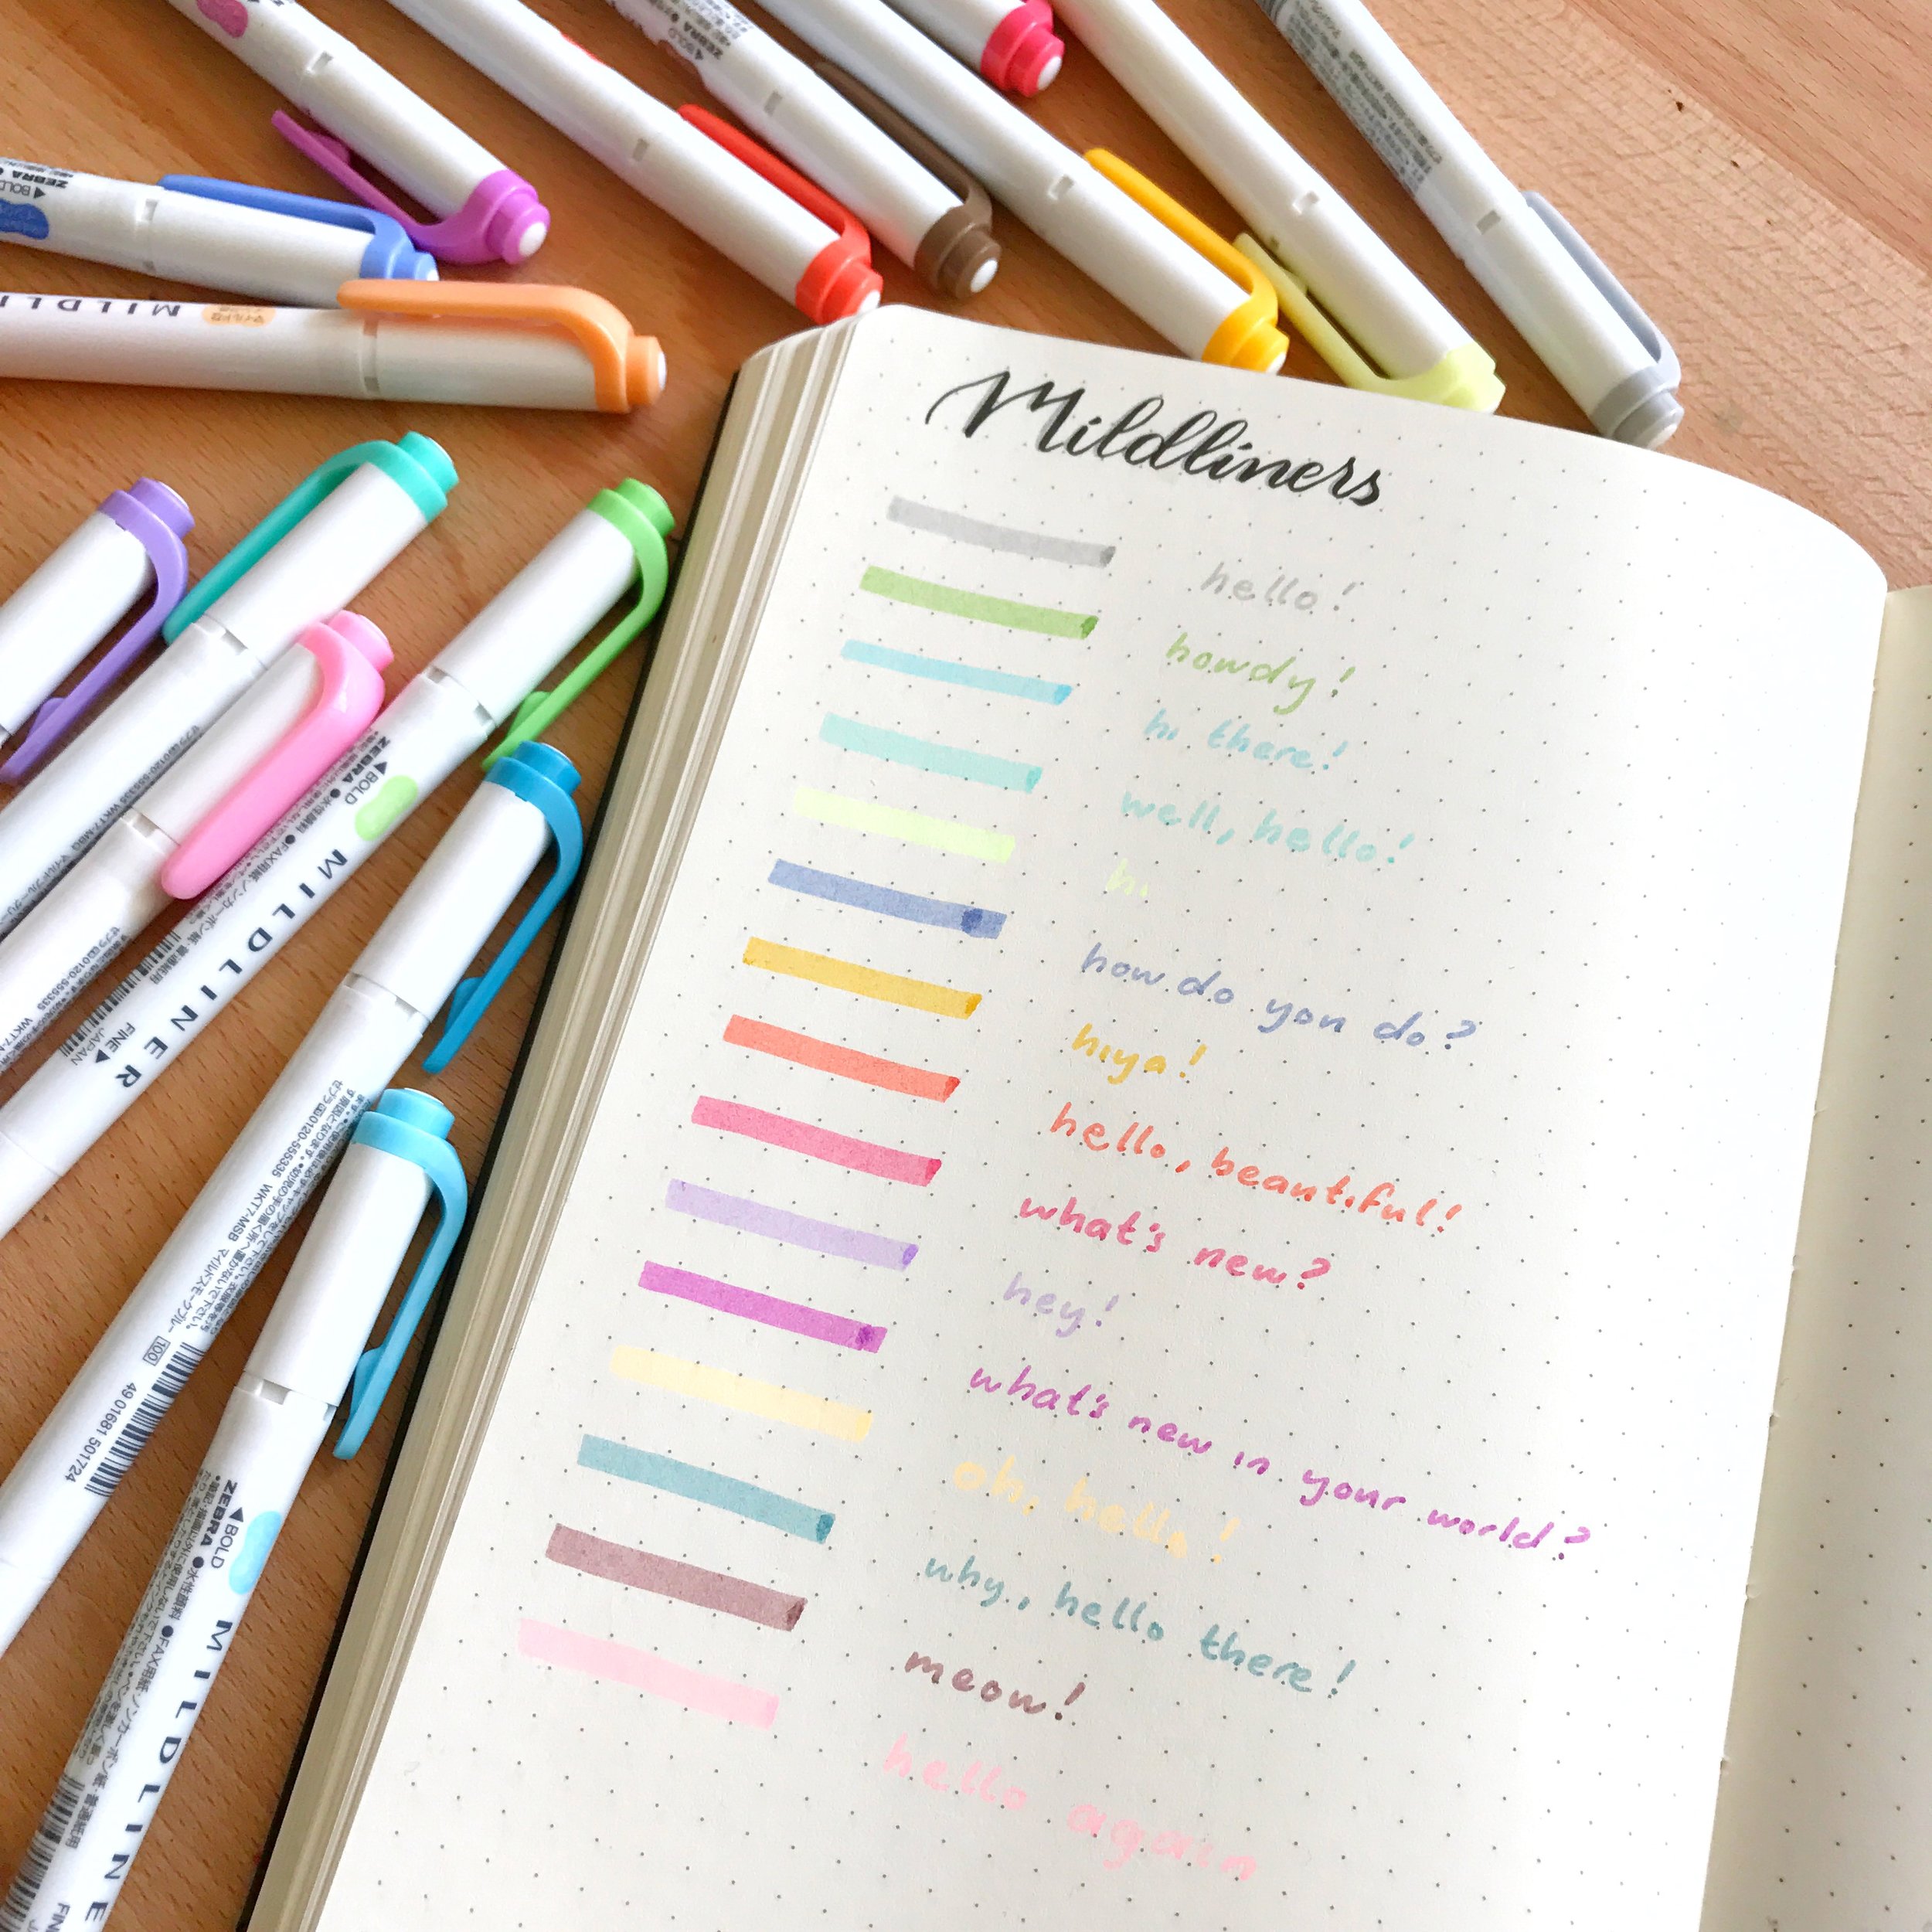 Bullet Journal Pens - Which are the Best Pens for a Bullet Journal?